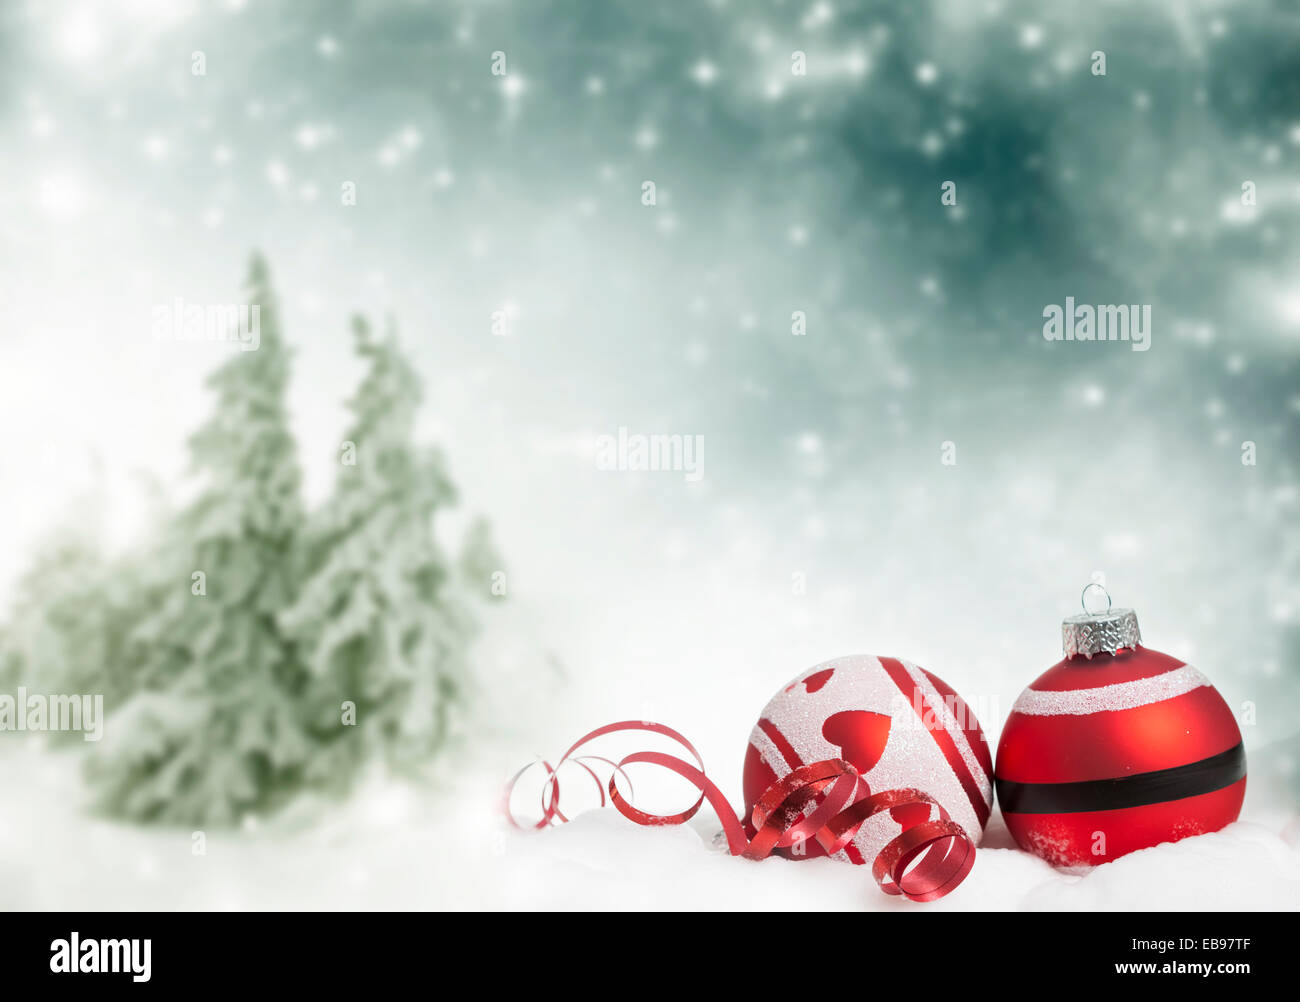 Red Christmas decorations in front of snow cowered pine trees Stock Photo